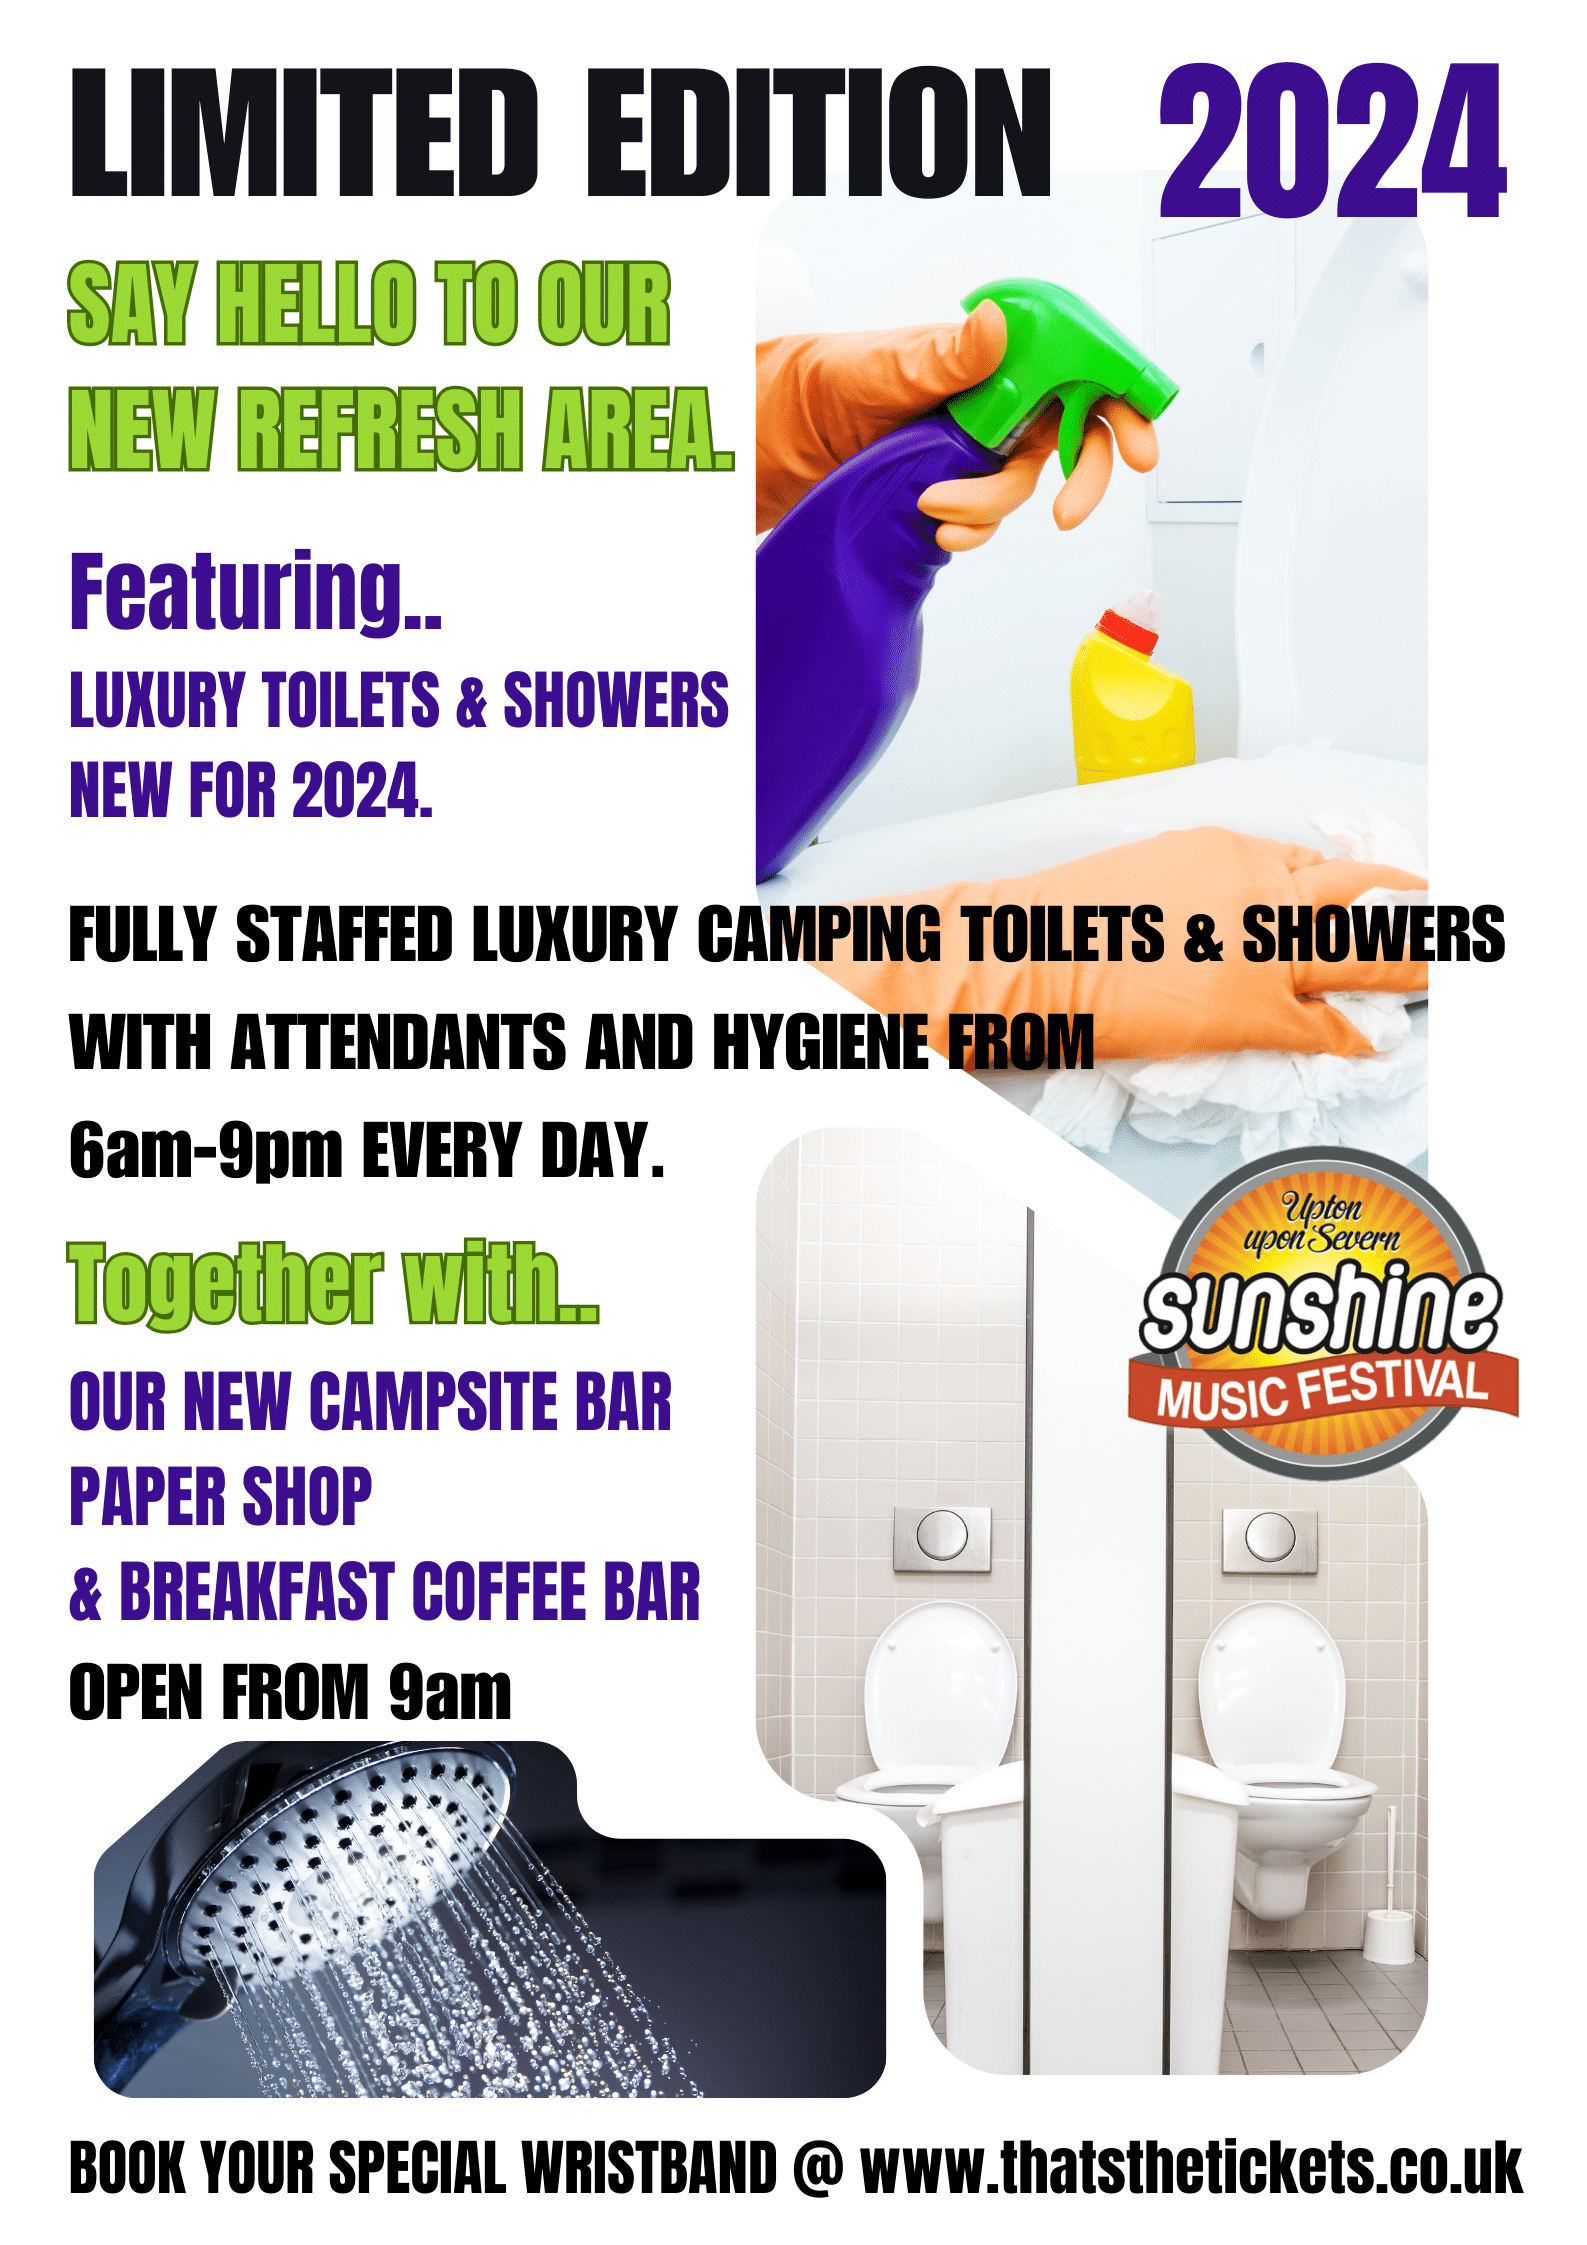 Luxury Toilet and Showers at Sunshine Festival 2024